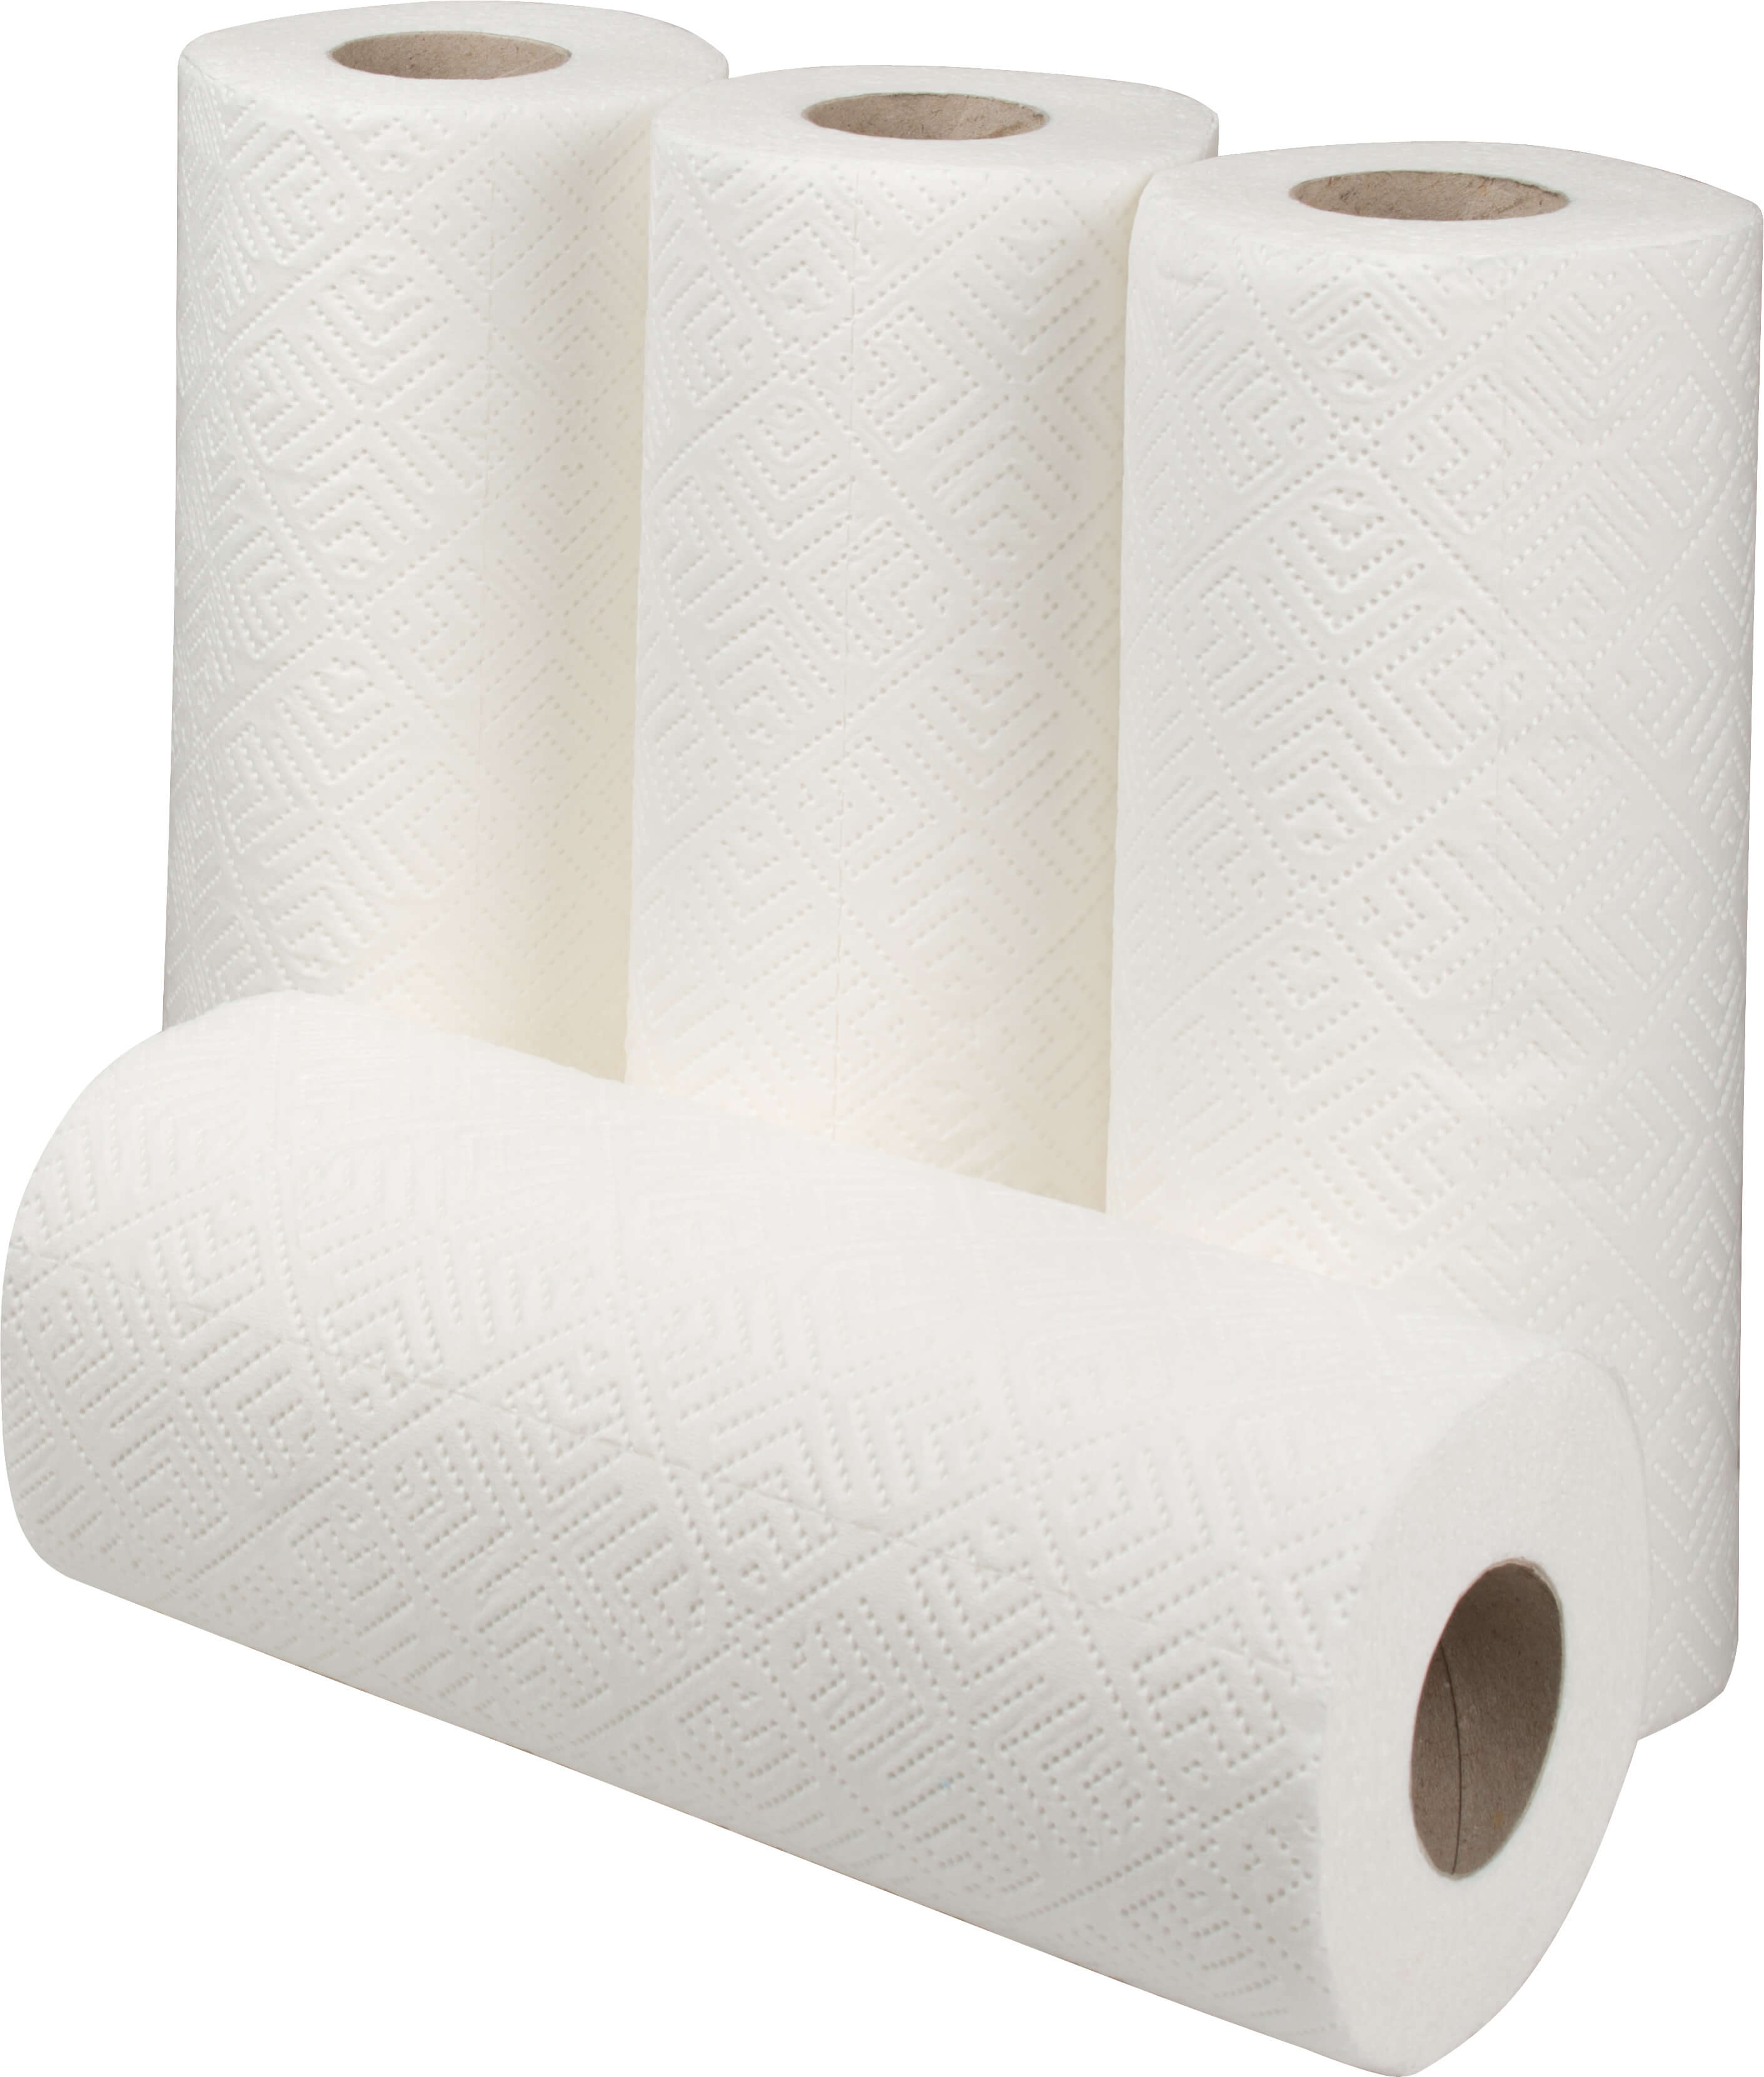 Kitchen Roll 3-ply, 50 sheets - 4 rolls